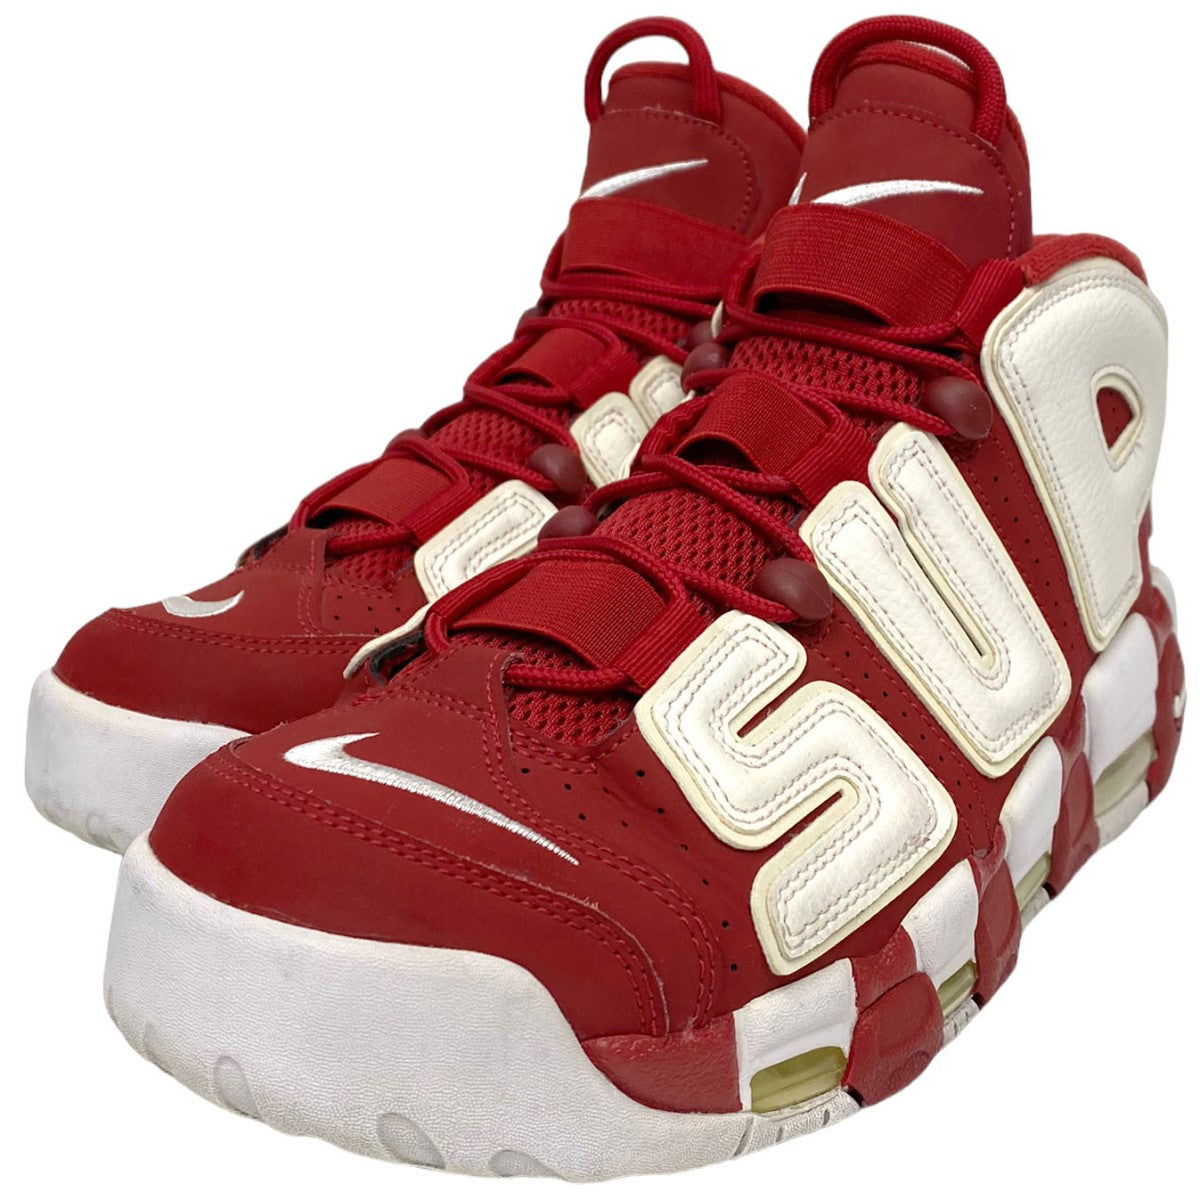 AIR MORE UPTEMPO White／Redアップテンポ モアテンスニーカー靴